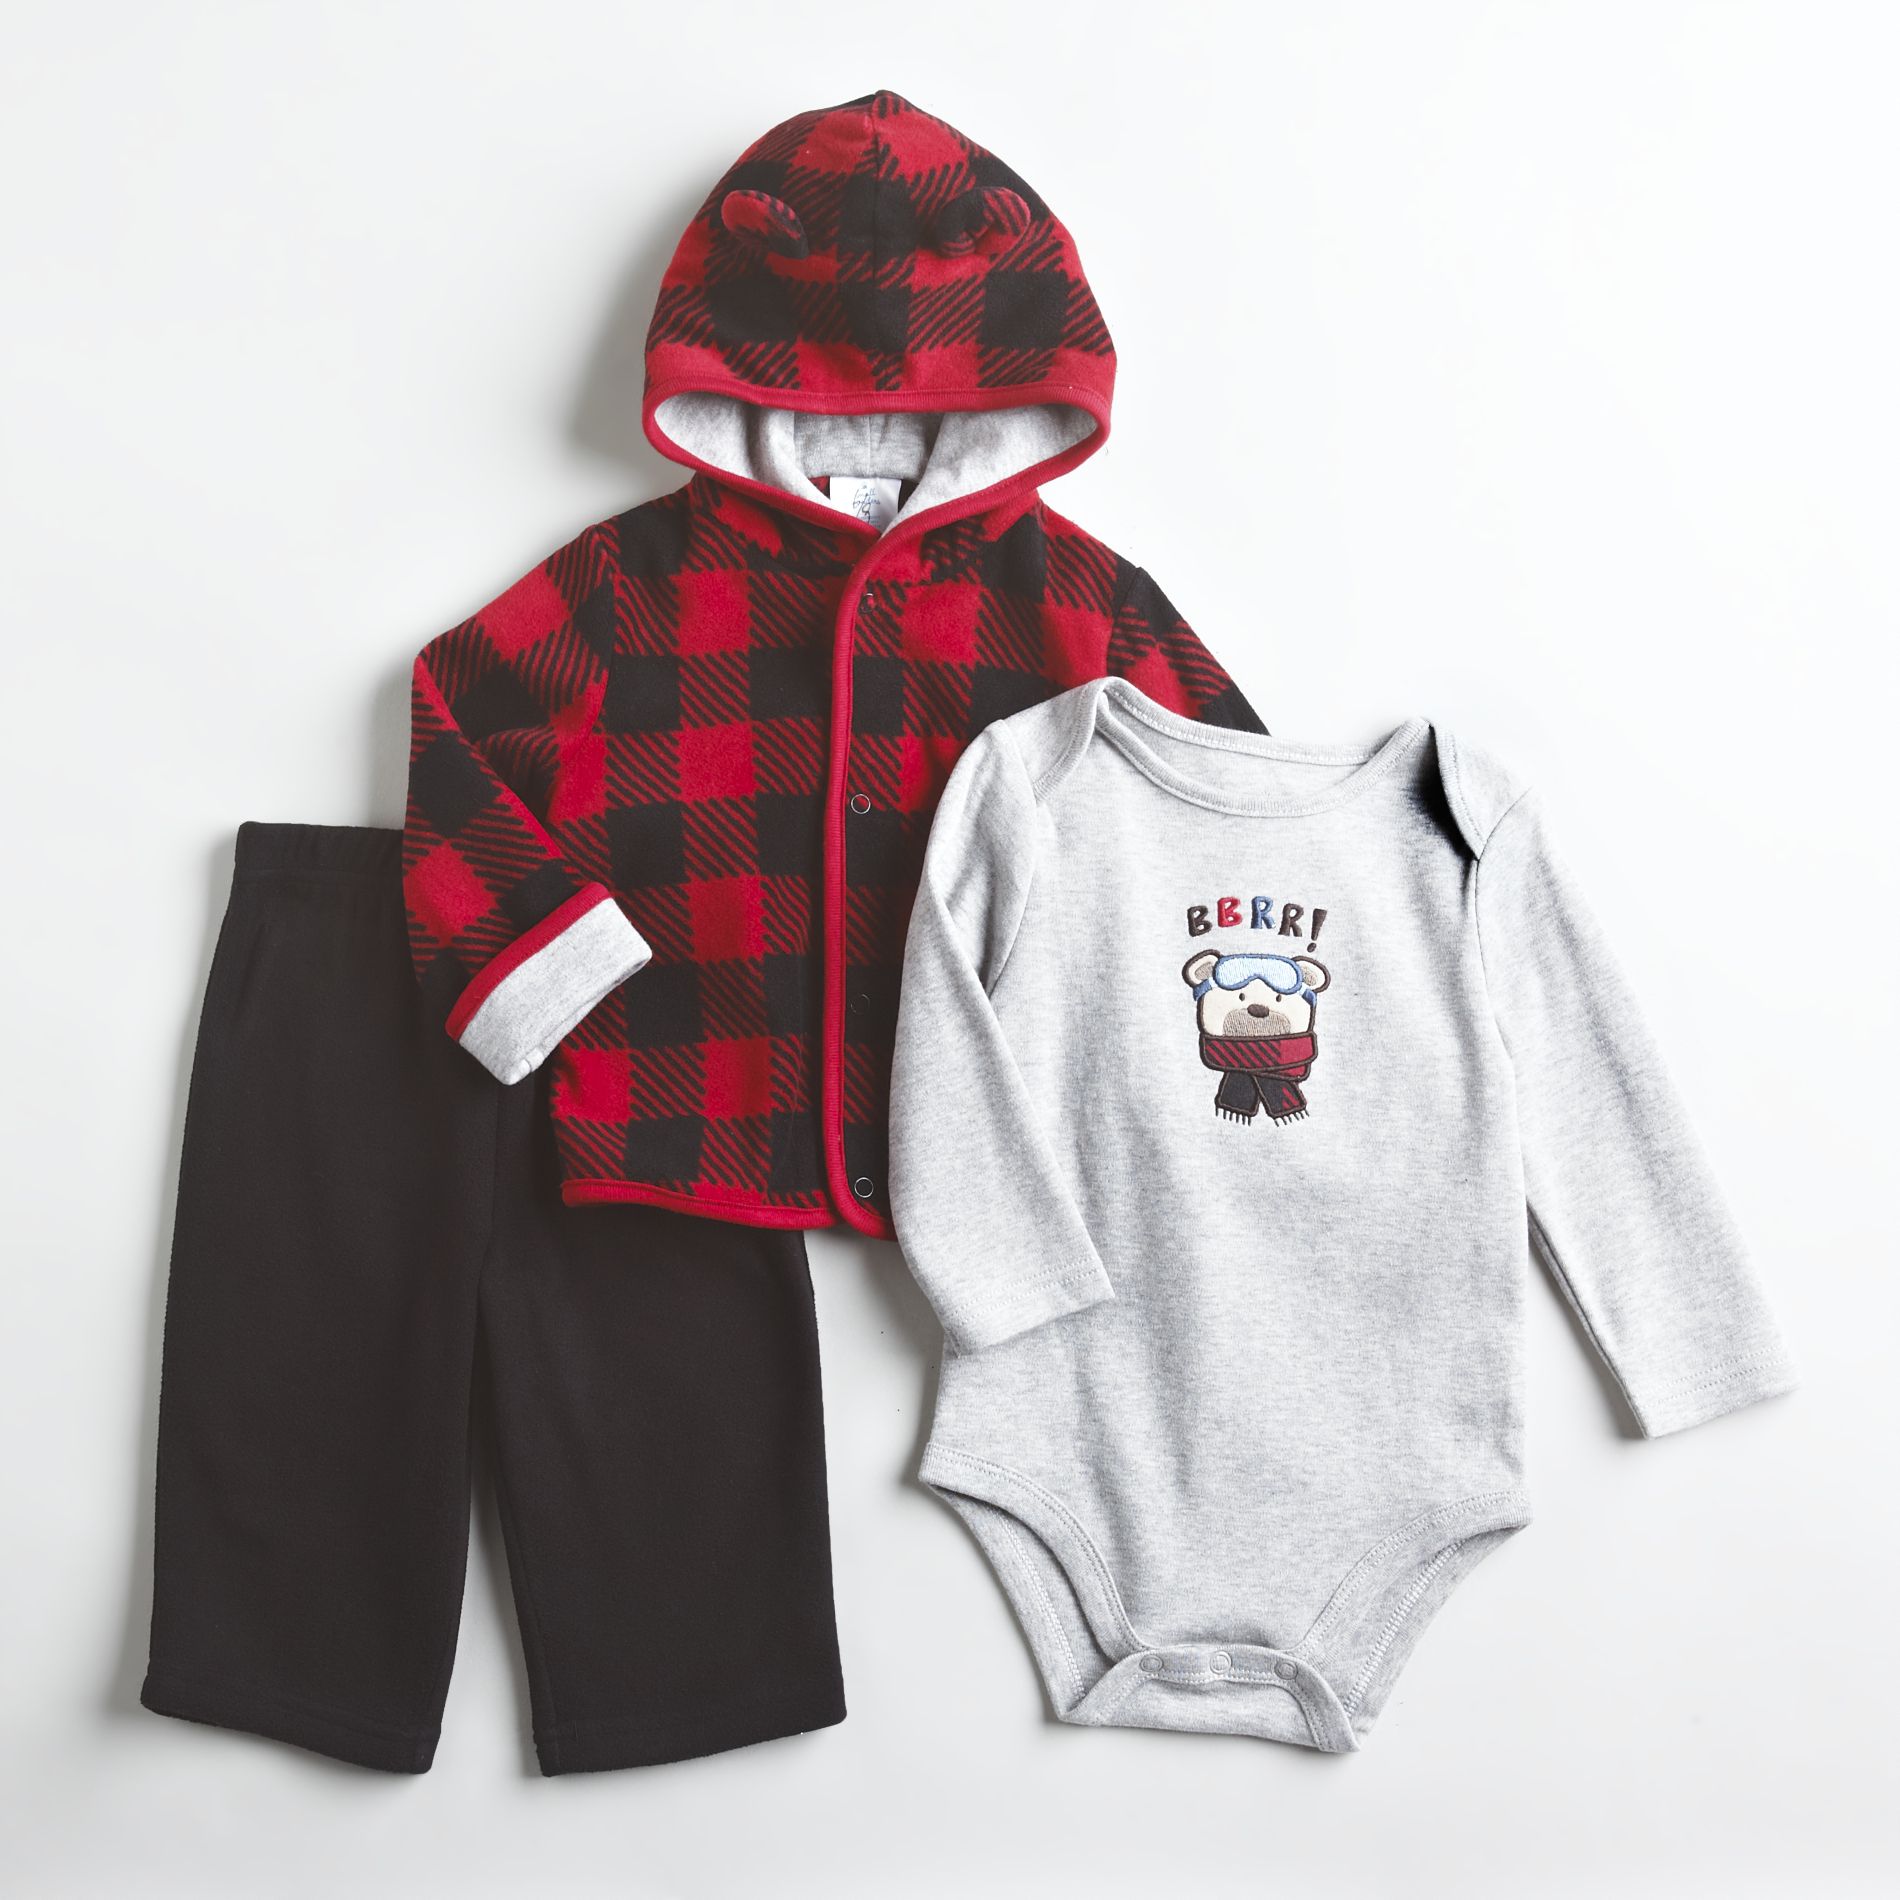 Small Wonders Infant Boy's Three-Piece Outfit